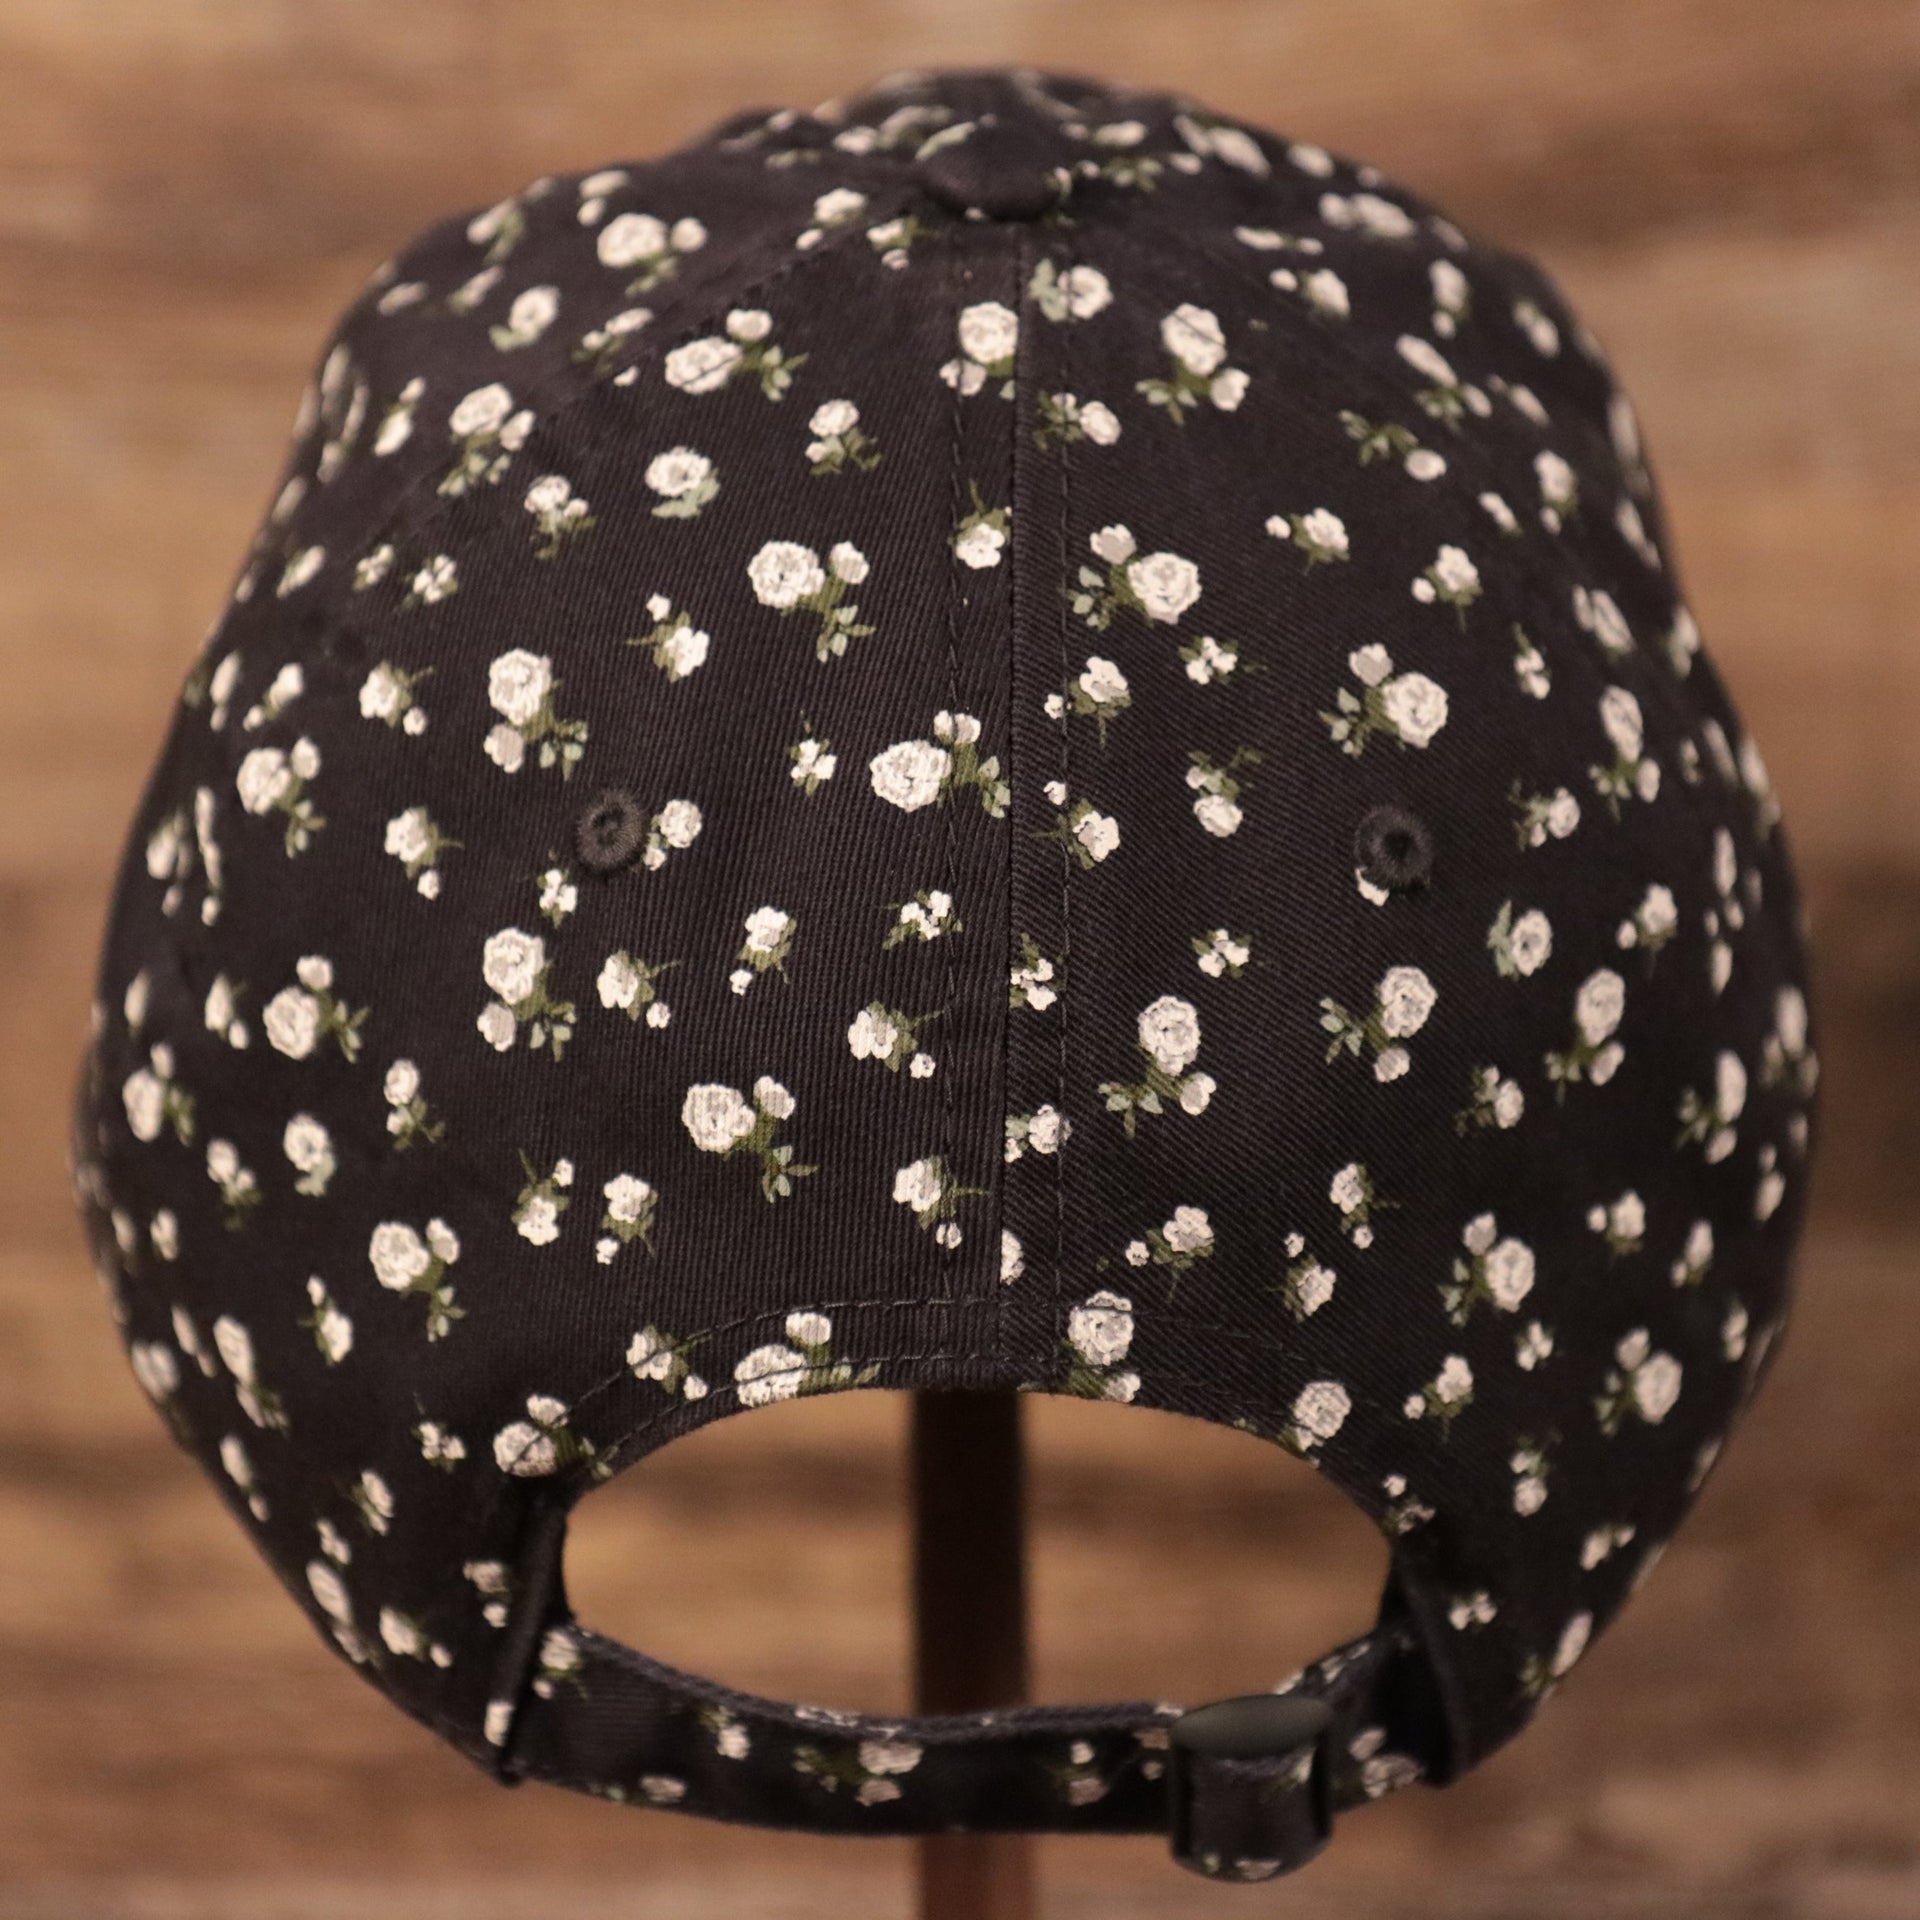 The backside of the Yankees hat with flowers has an adjustable strap.